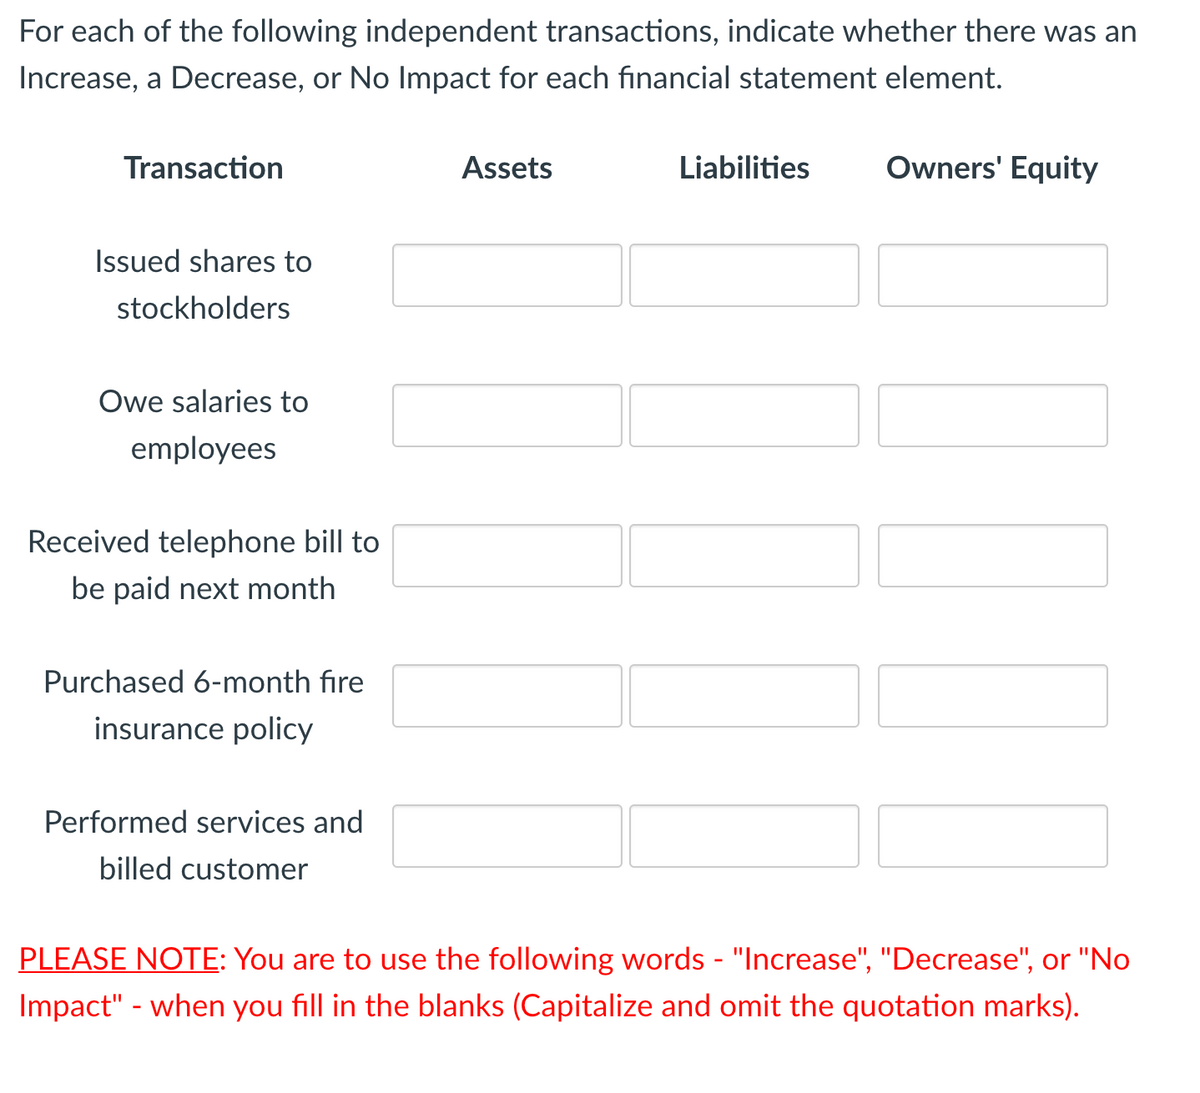 For each of the following independent transactions, indicate whether there was an
Increase, a Decrease, or No Impact for each financial statement element.
Transaction
Assets
Liabilities
Owners' Equity
Issued shares to
stockholders
Owe salaries to
employees
Received telephone bill to
be paid next month
Purchased 6-month fire
insurance policy
Performed services and
billed customer
PLEASE NOTE: You are to use the following words - "Increase", "Decrease", or "No
Impact" - when you fill in the blanks (Capitalize and omit the quotation marks).
